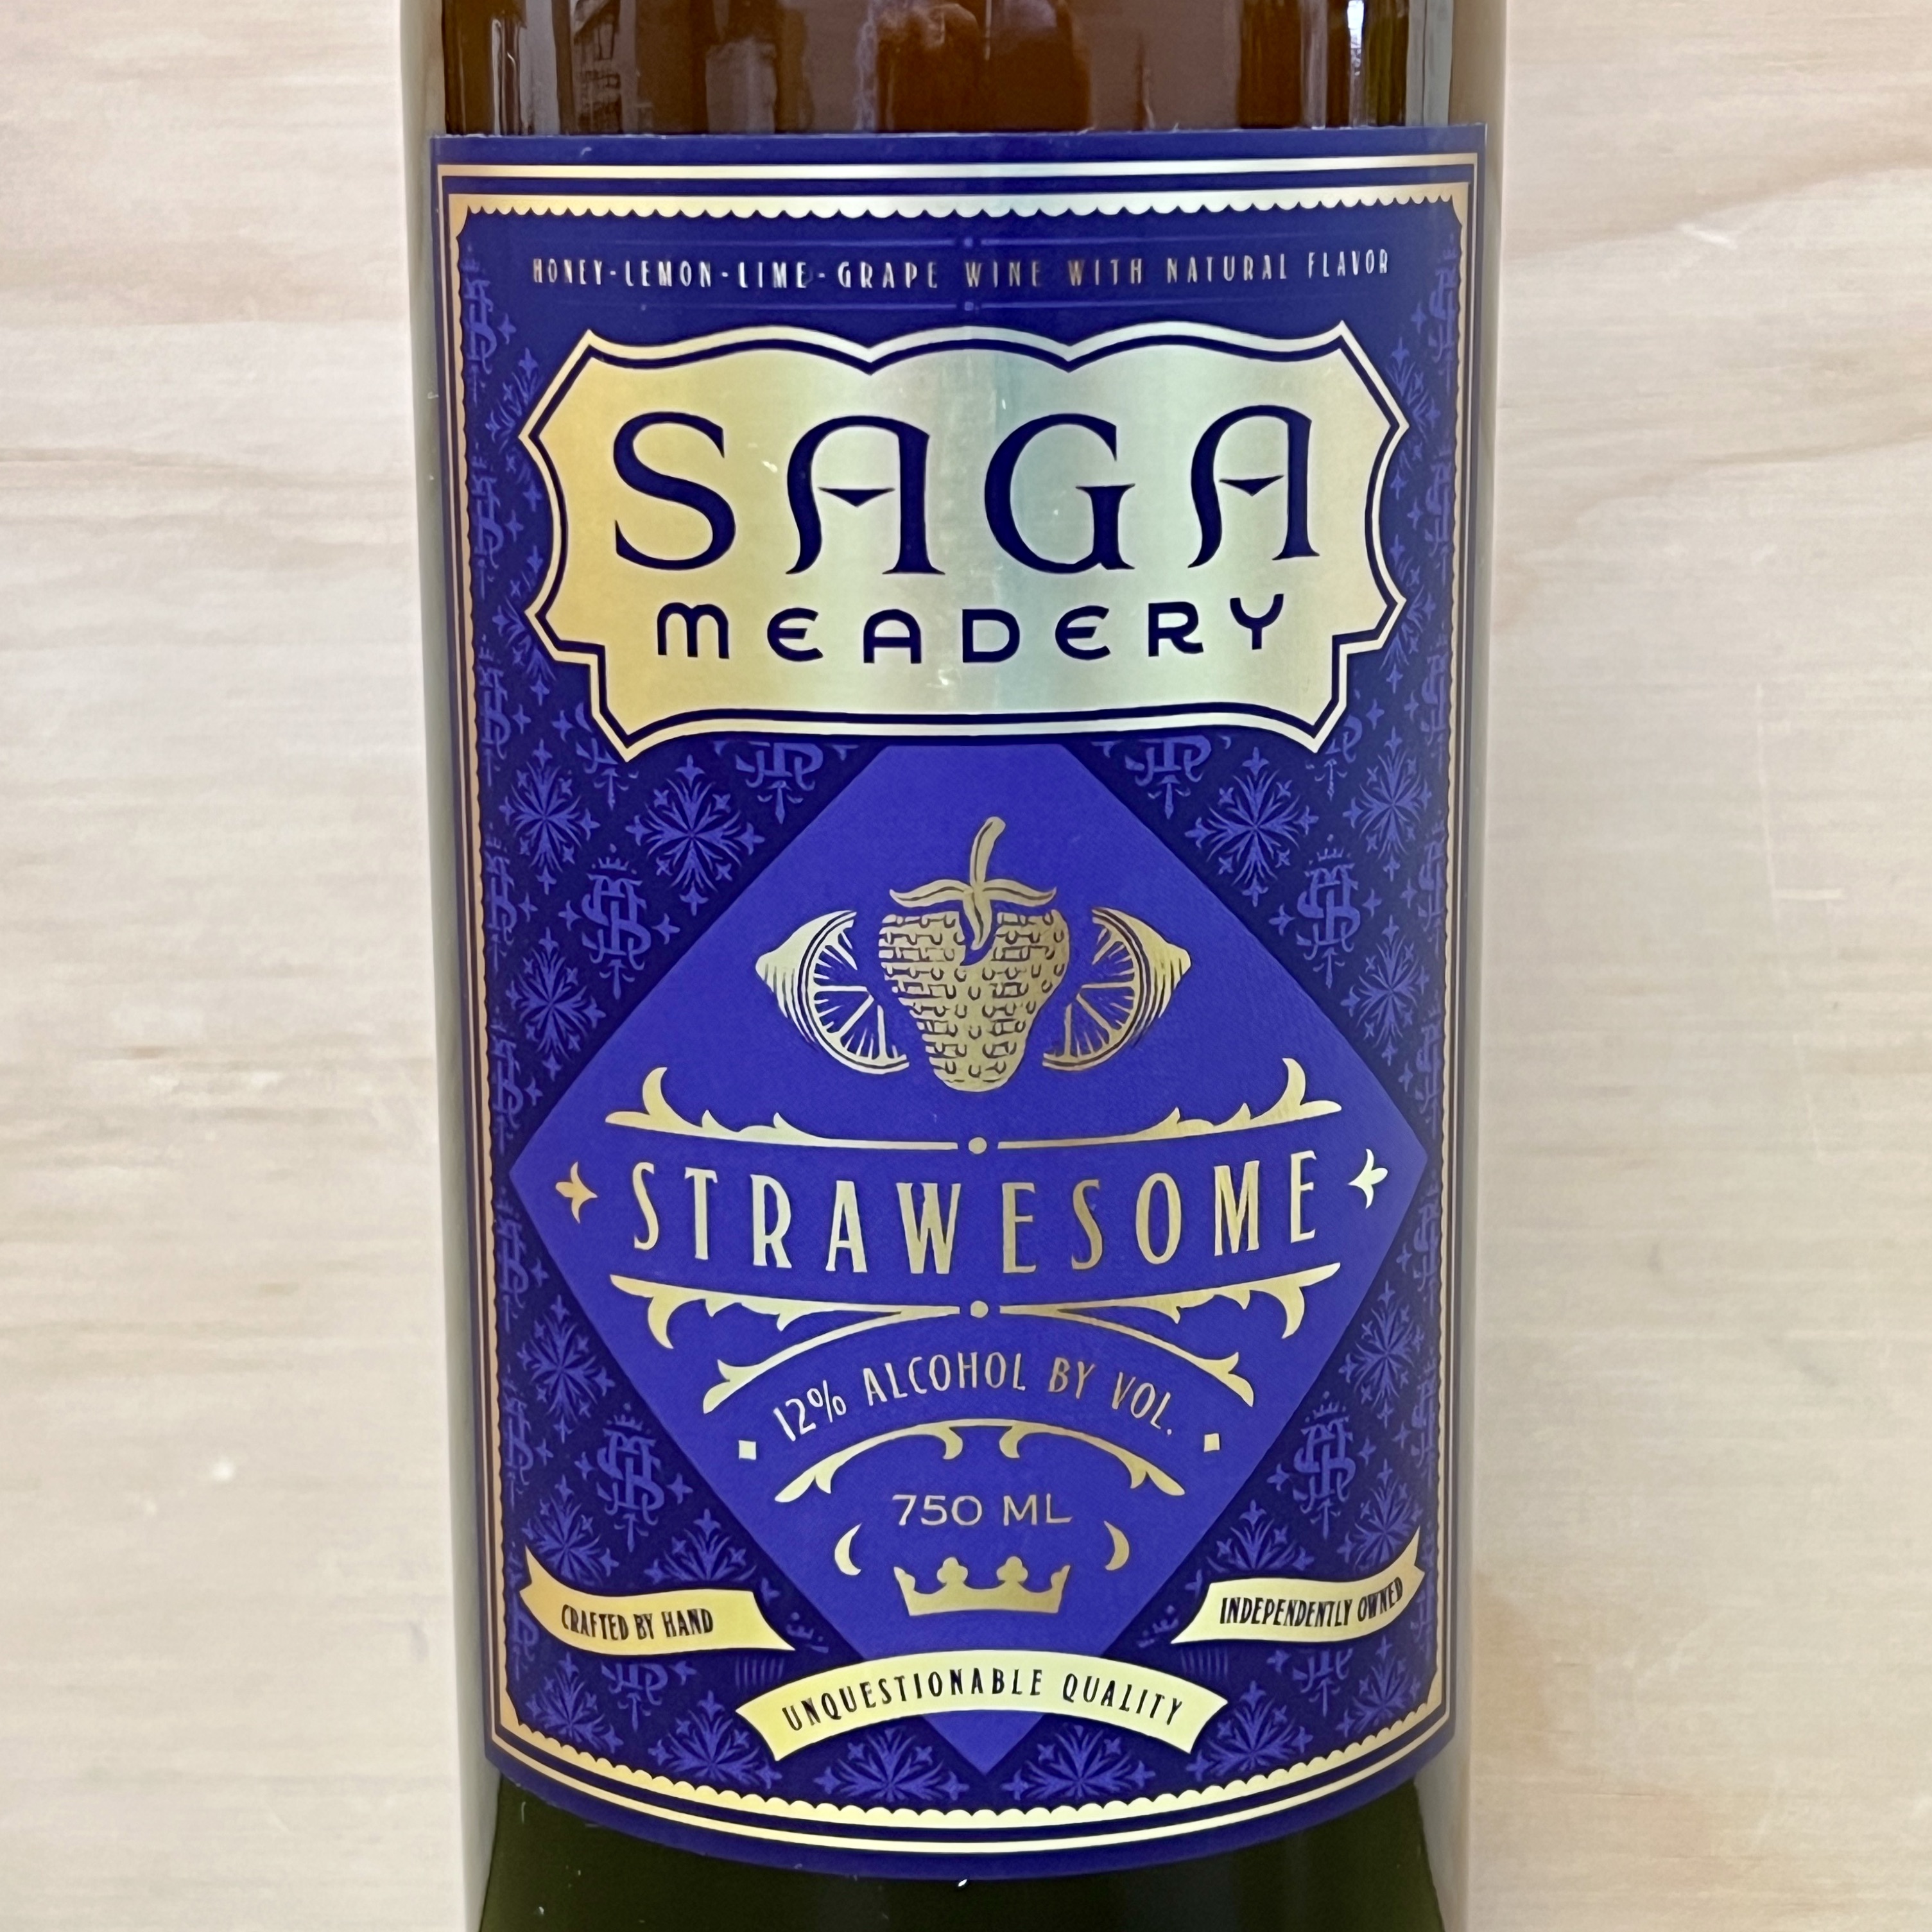 Saga Meadery Strawesome Mead